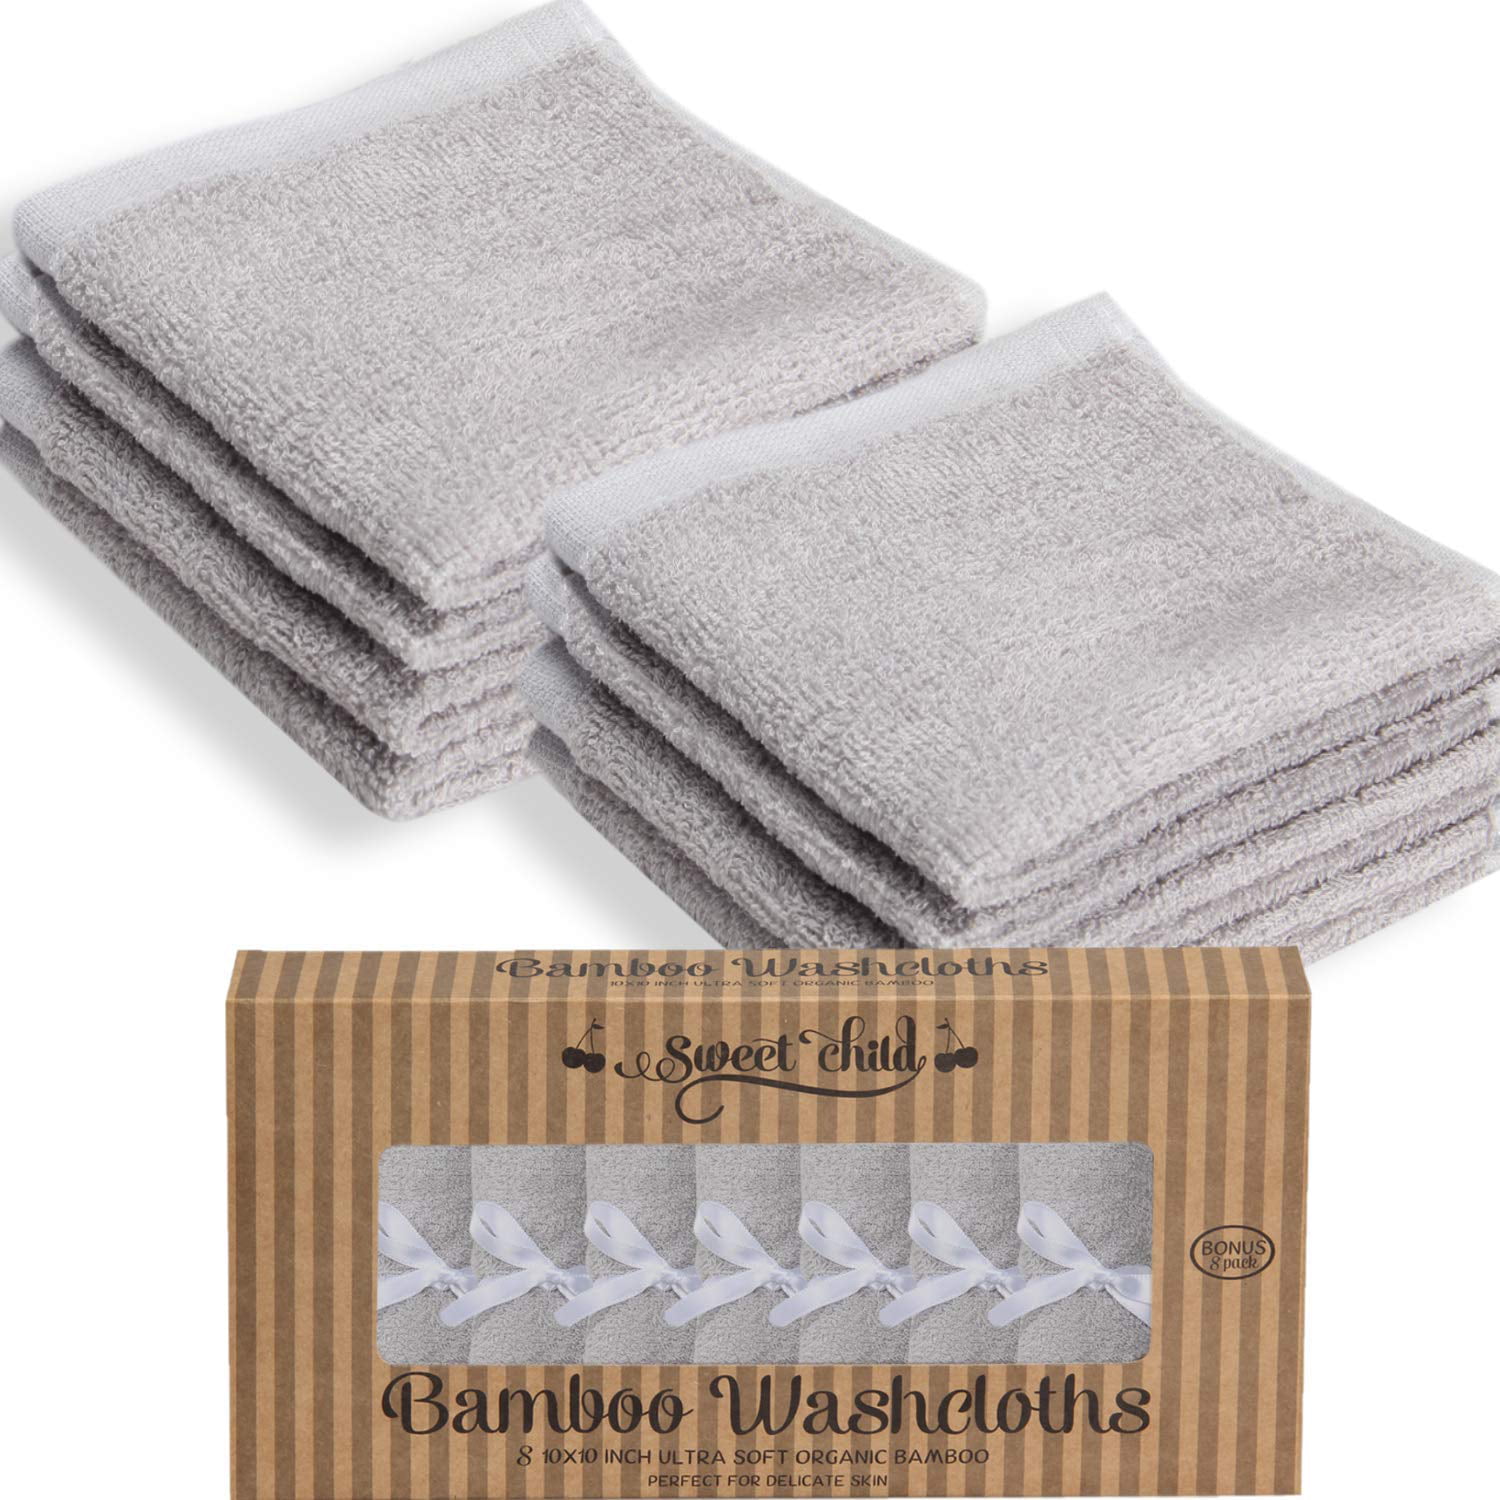 Utopia Towels 10 Pack Organic Bamboo Baby Washcloths 10 x 10 Inches Reusable Wipes - Perfect Bamboo Washcloths for Sensitive Skin of All Ages Premium Quality Ultra Soft Face Towels